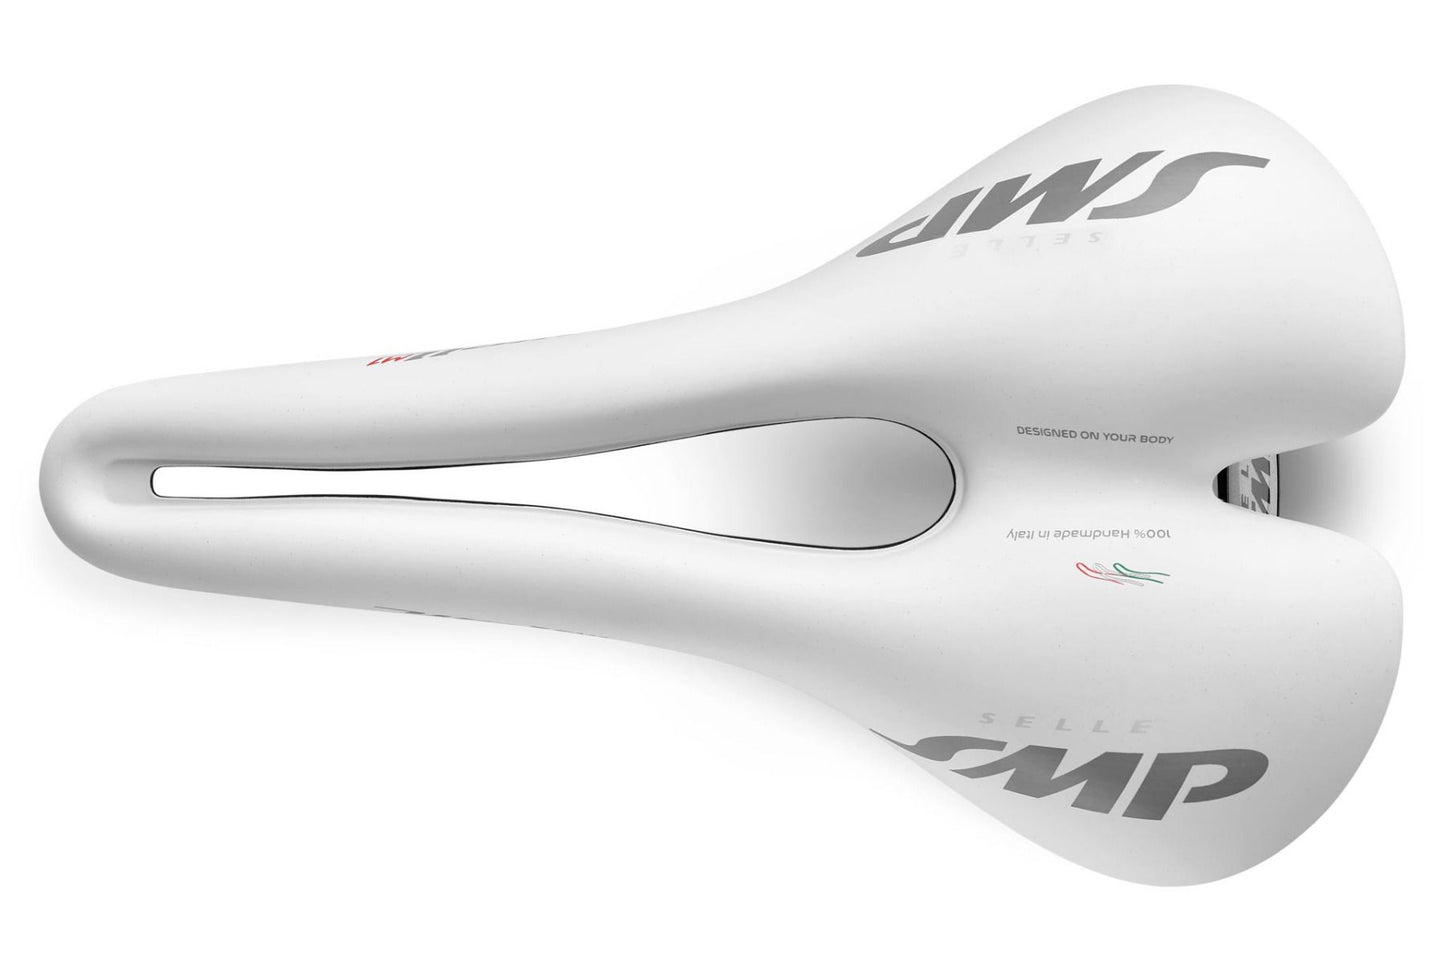 Selle SMP Well M1 Bicycle Saddle (with Steel Rails) White